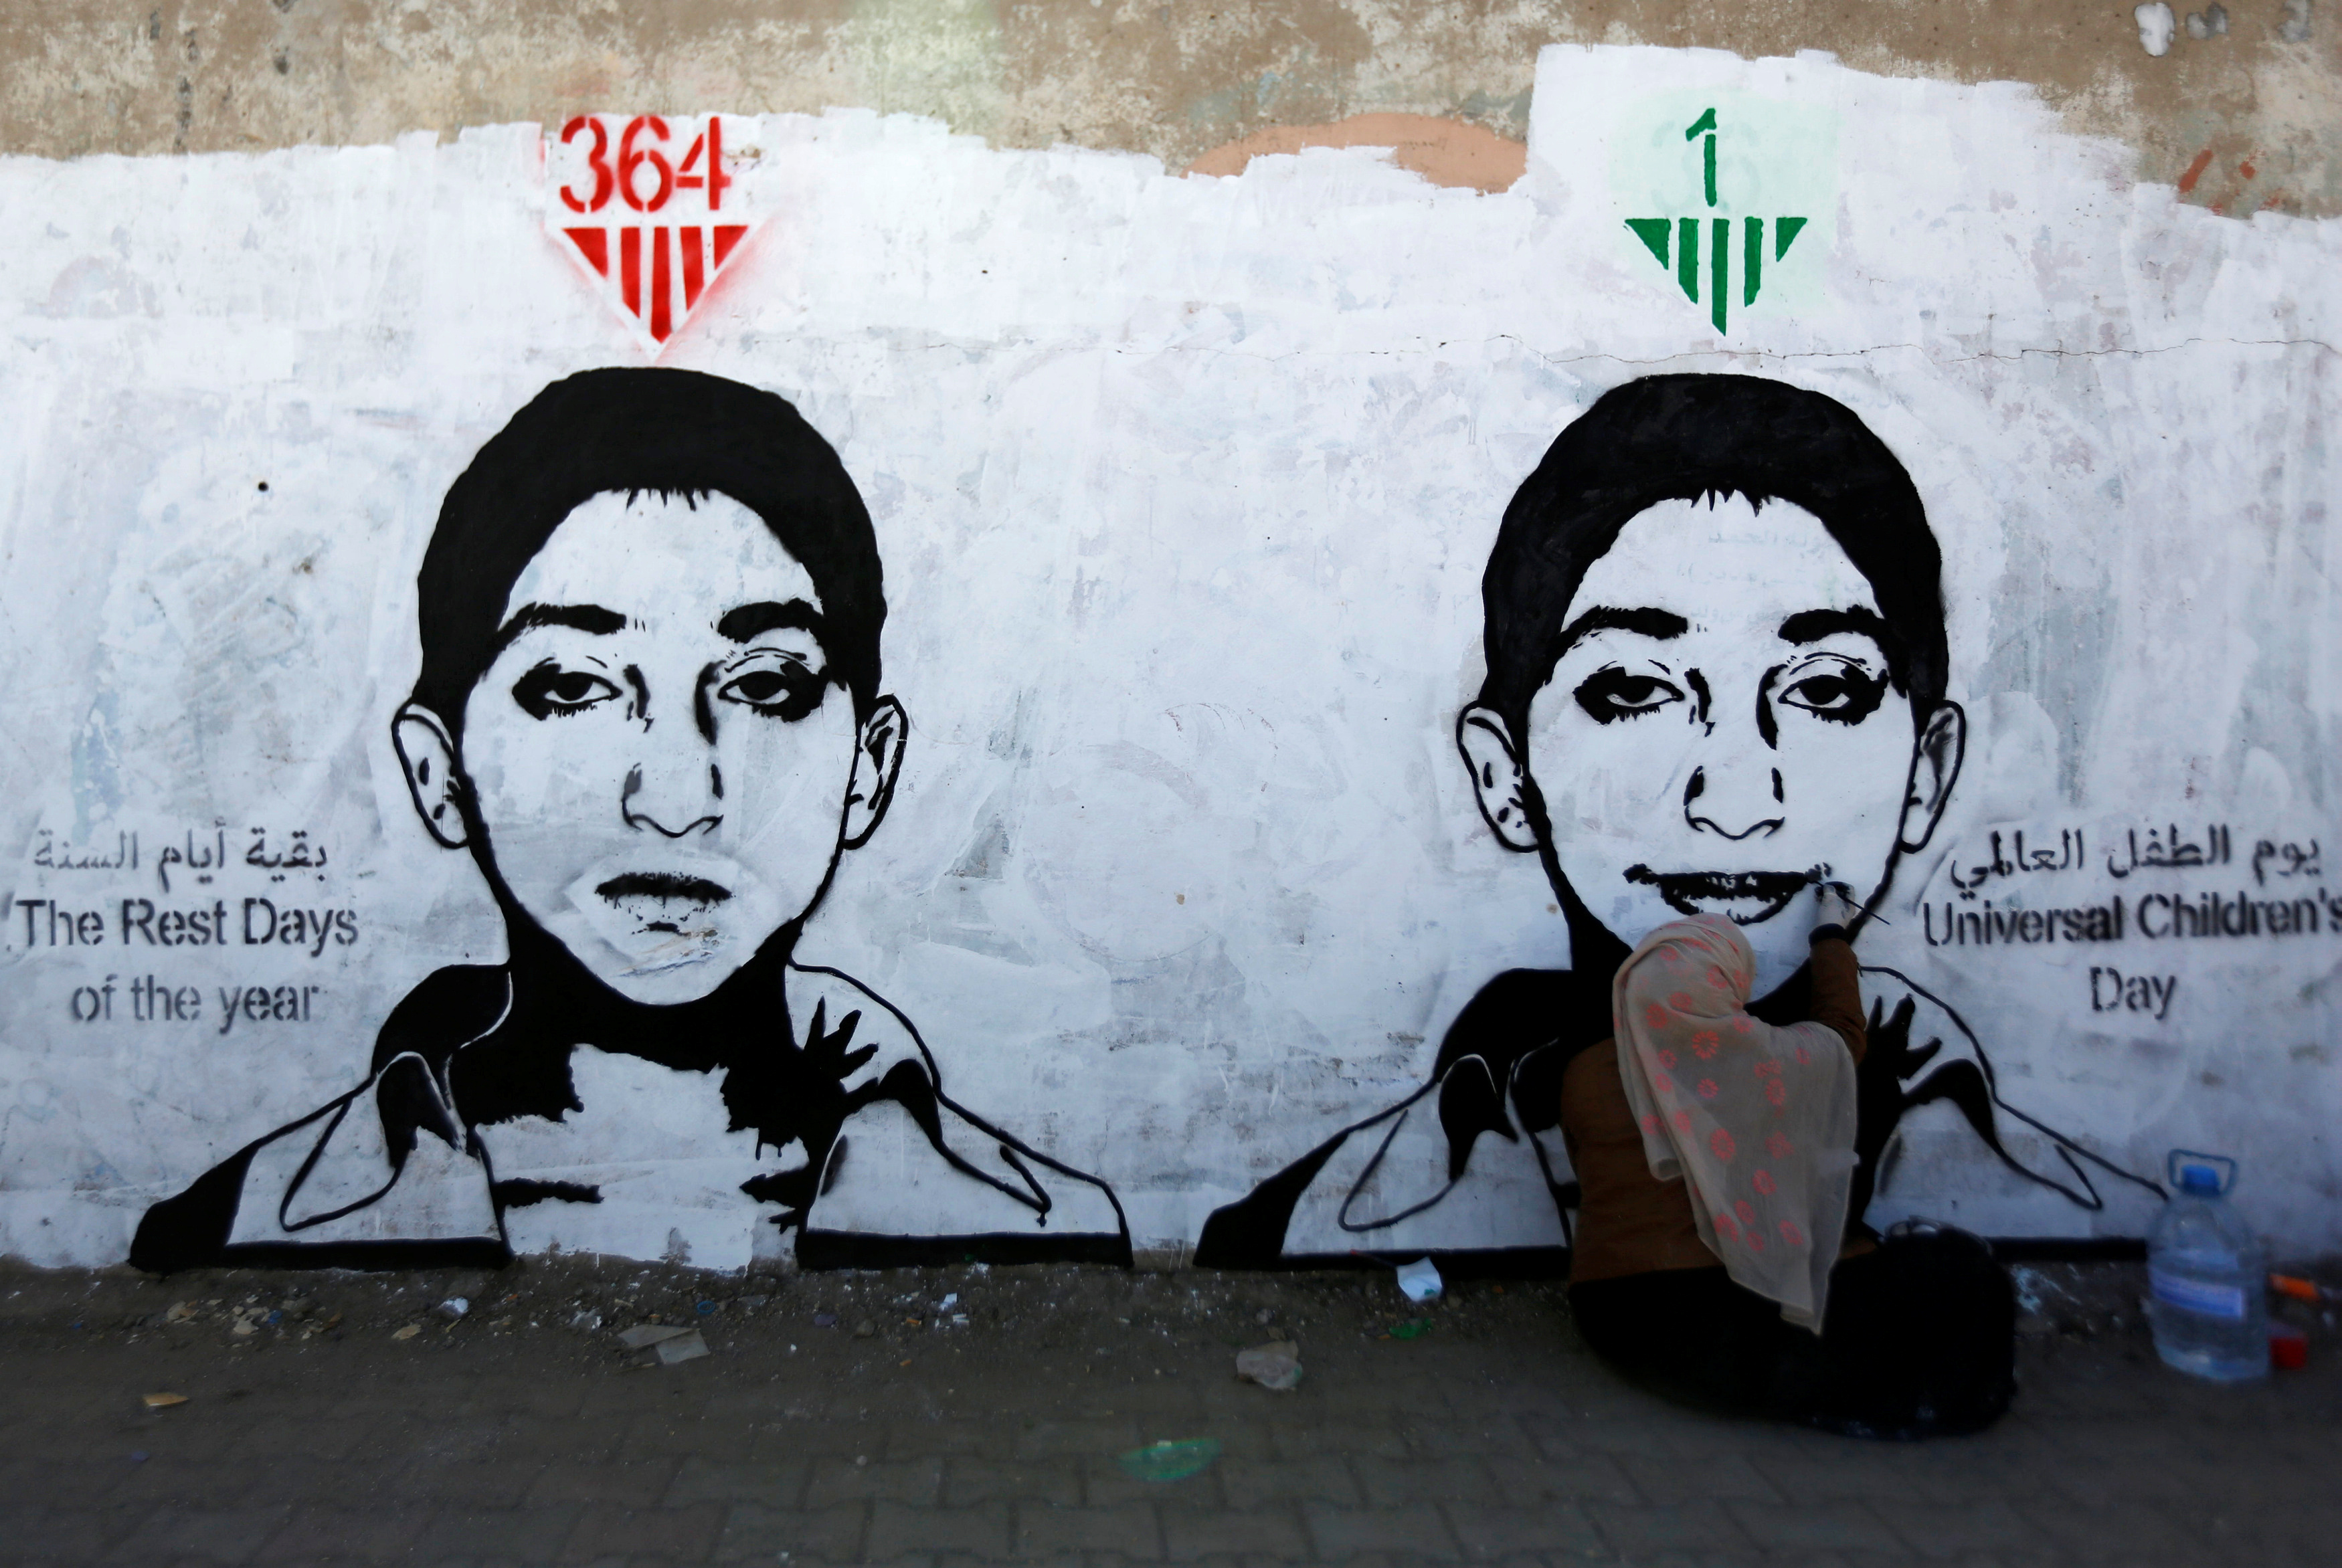 Artist Haifa Subay paints a mural about children's suffering in the time of war as part of the 'Silent Victims' campaign in Sanaa